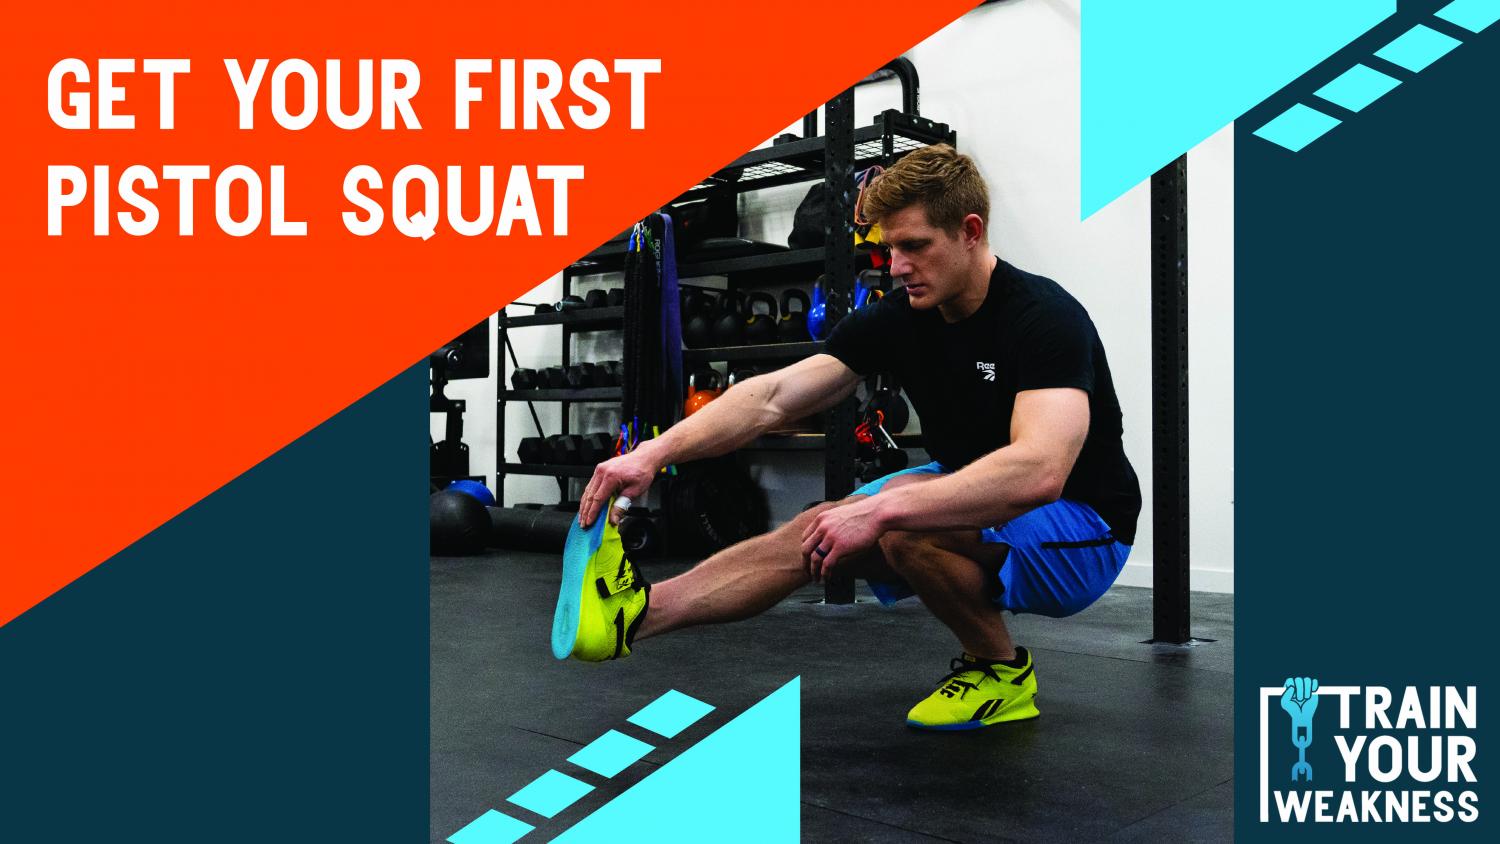 Pistol Squats For Beginners